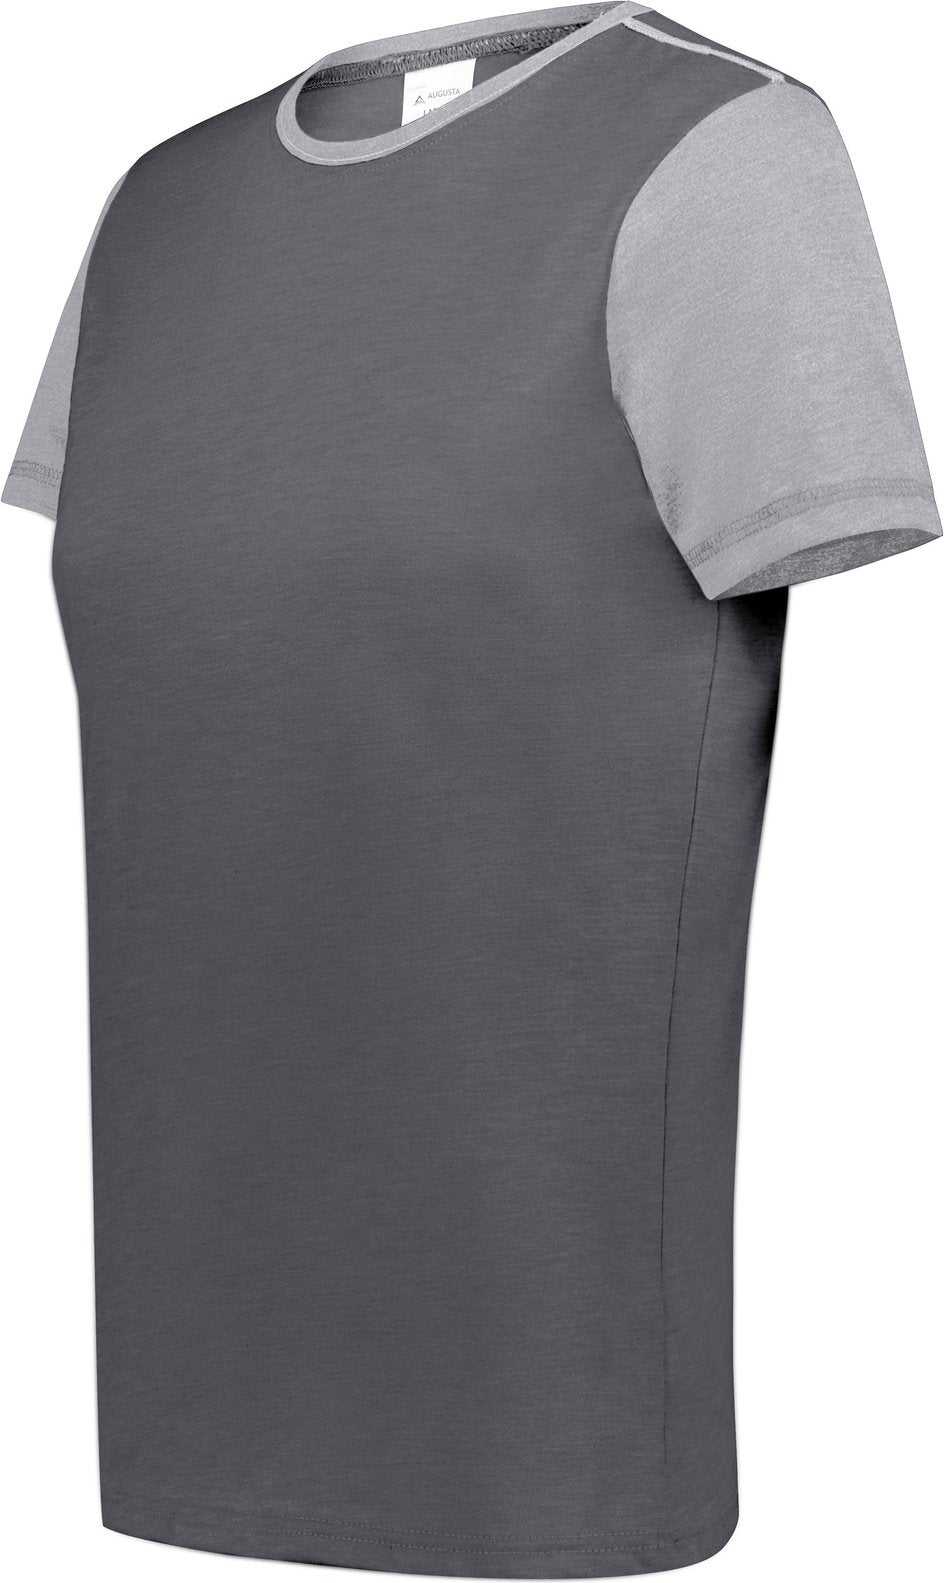 Augusta 6878 Ladies Gameday Vintage Ringer Tee - Carbon Heather Gray Heather - HIT a Double